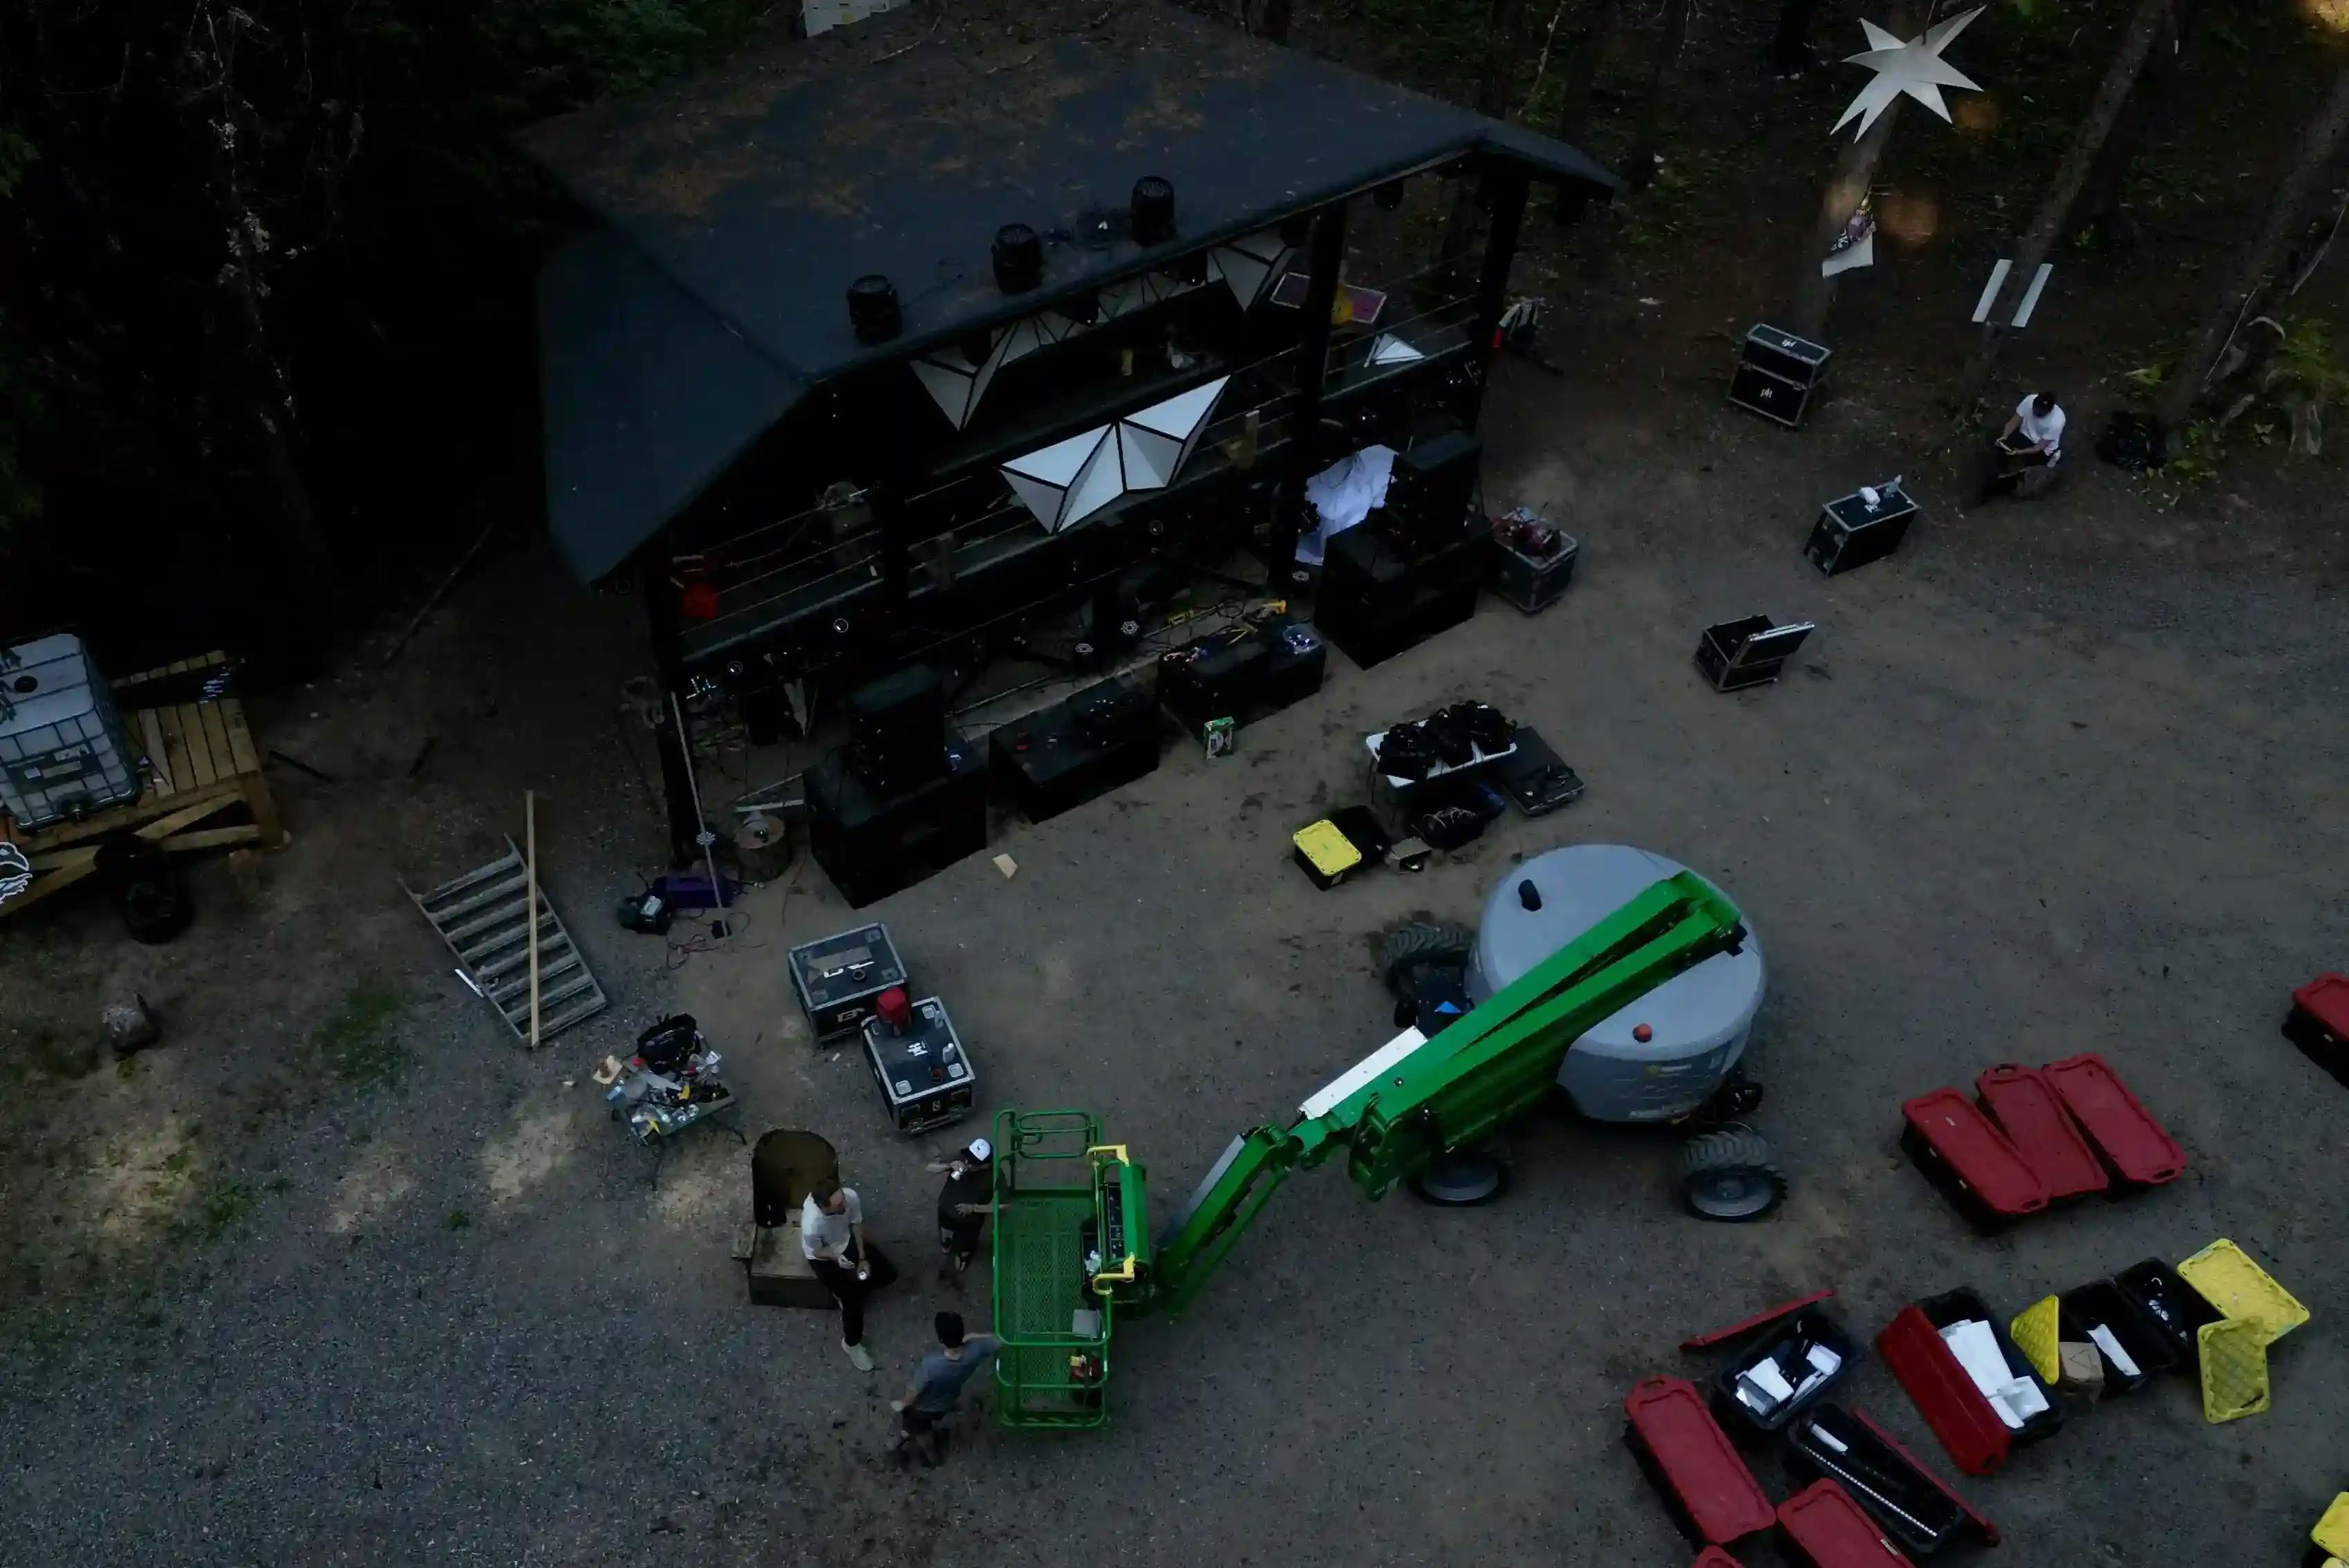 Overhead view of the Asgard stage during setup, with equipment and crew preparing for the festival.